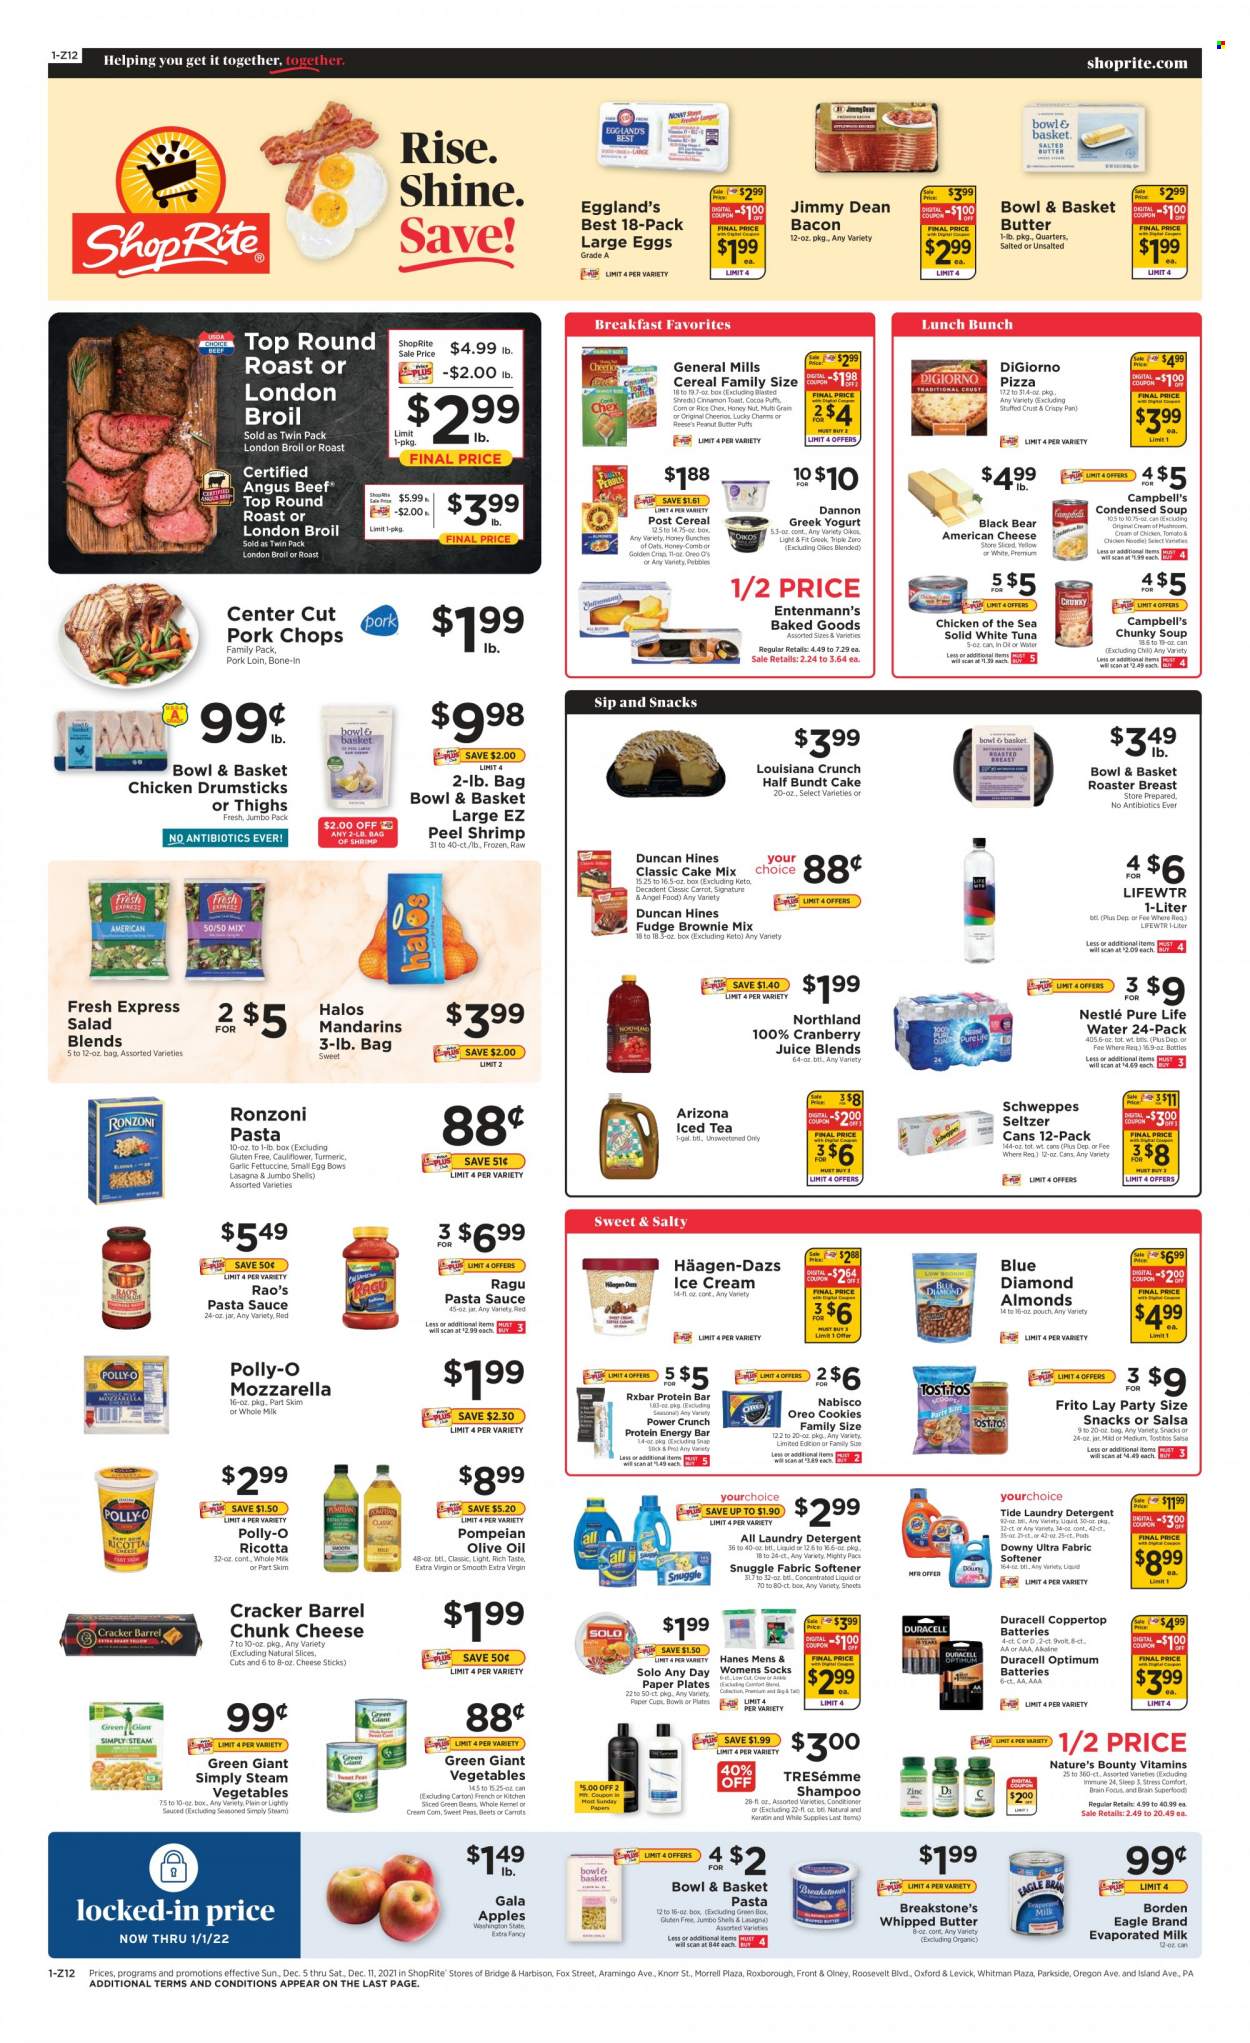 ShopRite Flyer - 12/05/2021 - 12/11/2021 - Sales products - Bowl & Basket, bundt, Angel Food, Entenmann's, brownie mix, cake mix, carrots, corn, garlic, green beans, salad, apples, Gala apple, mandarines, tuna, shrimps, Campbell's, pizza, pasta sauce, condensed soup, soup, Knorr, sauce, noodles, instant soup, lasagna meal, Jimmy Dean, ragú pasta, bacon, american cheese, ricotta, chunk cheese, greek yoghurt, Oreo, yoghurt, Oikos, Dannon, evaporated milk, large eggs, whipped butter, ice cream, Reese's, Häagen-Dazs, cheese Sticks, cookies, Fudge, Nestlé, crackers, Tostitos, cocoa, Chicken of the Sea, cereals, Cheerios, protein bar, turmeric, cinnamon, salsa, ragu, extra virgin olive oil, olive oil, peanut butter, Blue Diamond, cranberry juice, Schweppes, juice, ice tea, AriZona, seltzer water, Lifewtr, Pure Life Water, chicken drumsticks, chicken meat, beef meat, round roast, pork chops, pork loin, pork meat, detergent, Snuggle, Tide, fabric softener, laundry detergent, Downy laundry, shampoo, conditioner, TRESemmé, comb, keratin, plate, pan, cup, paper, paper plate, party cups, battery, Duracell, Optimum, socks, Nature's Bounty. Page 1.